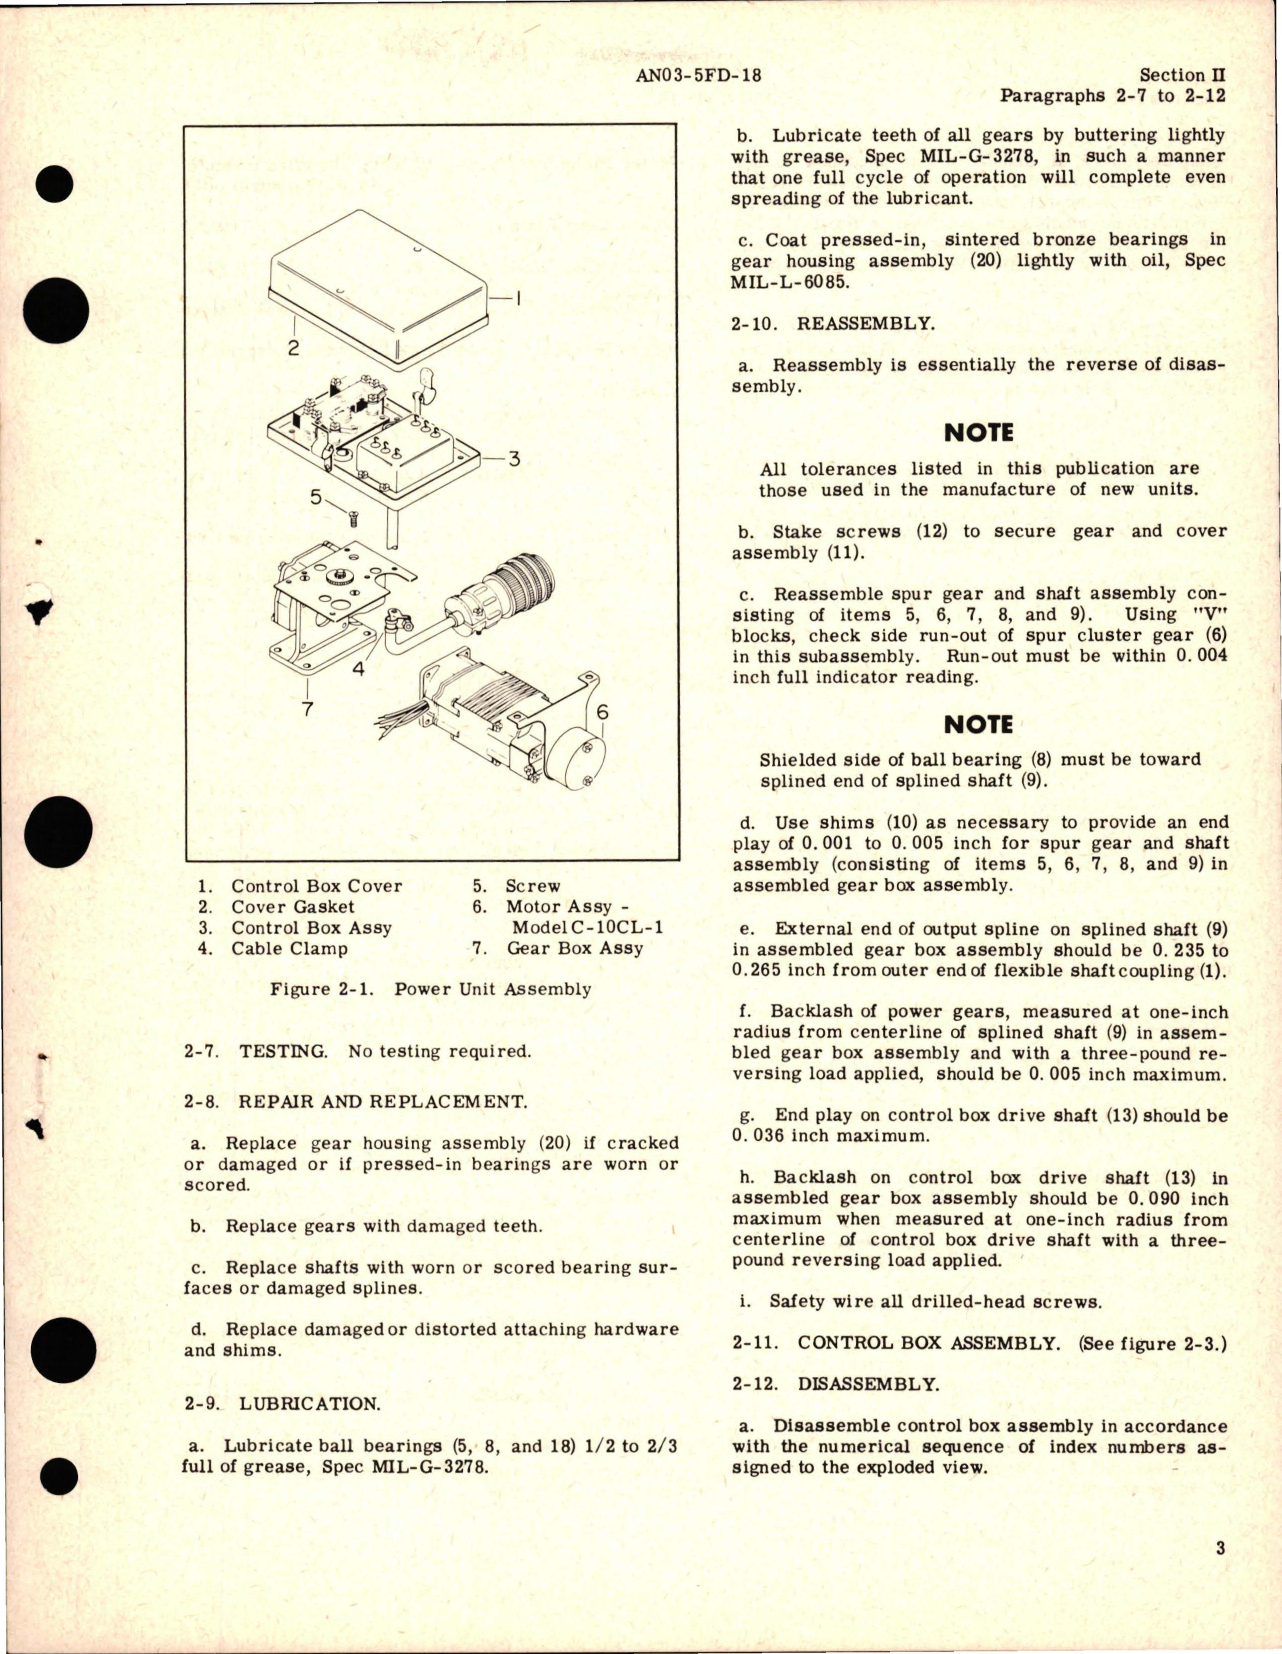 Sample page 5 from AirCorps Library document: Overhaul Instructions for Power Unit 